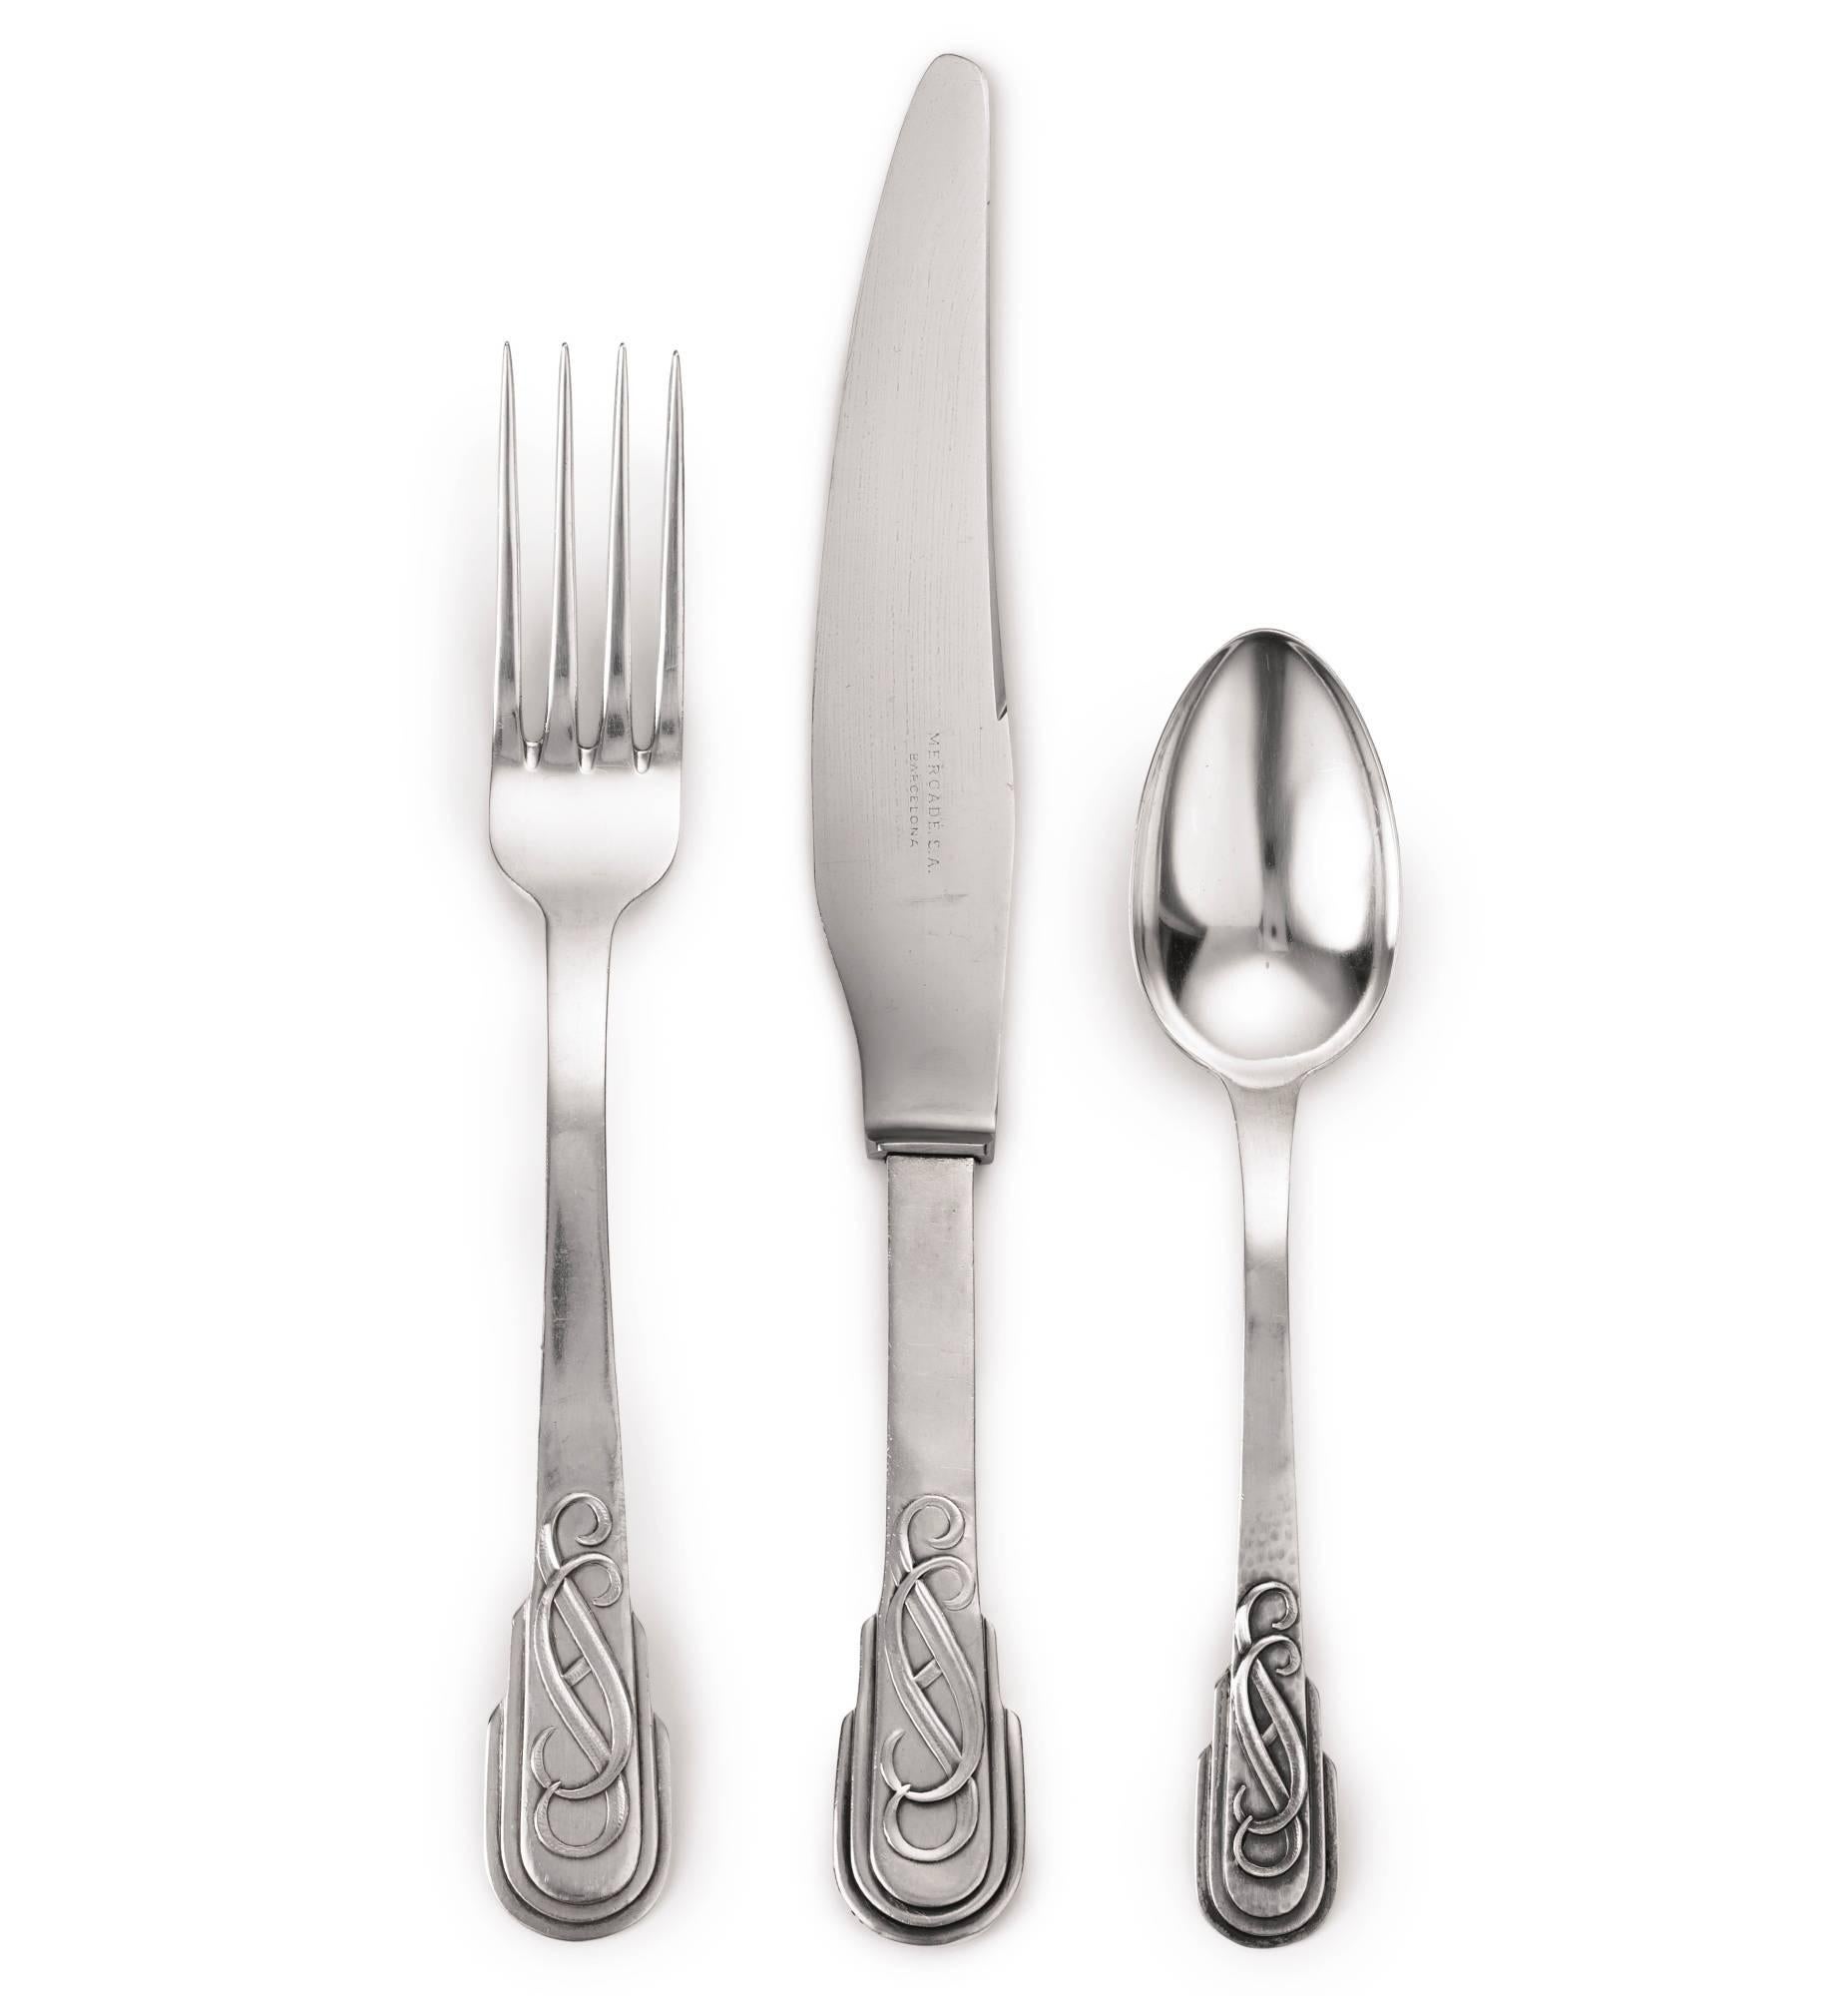 Antique Art Deco Jaume Mercade Queralt Solid .916 Silver Hand Made 196 Piece Flatware Set that serves 12.  The set is complete without a single missing piece. It is in excellent condition, just perfect with a lovely patina. The entire set is hand